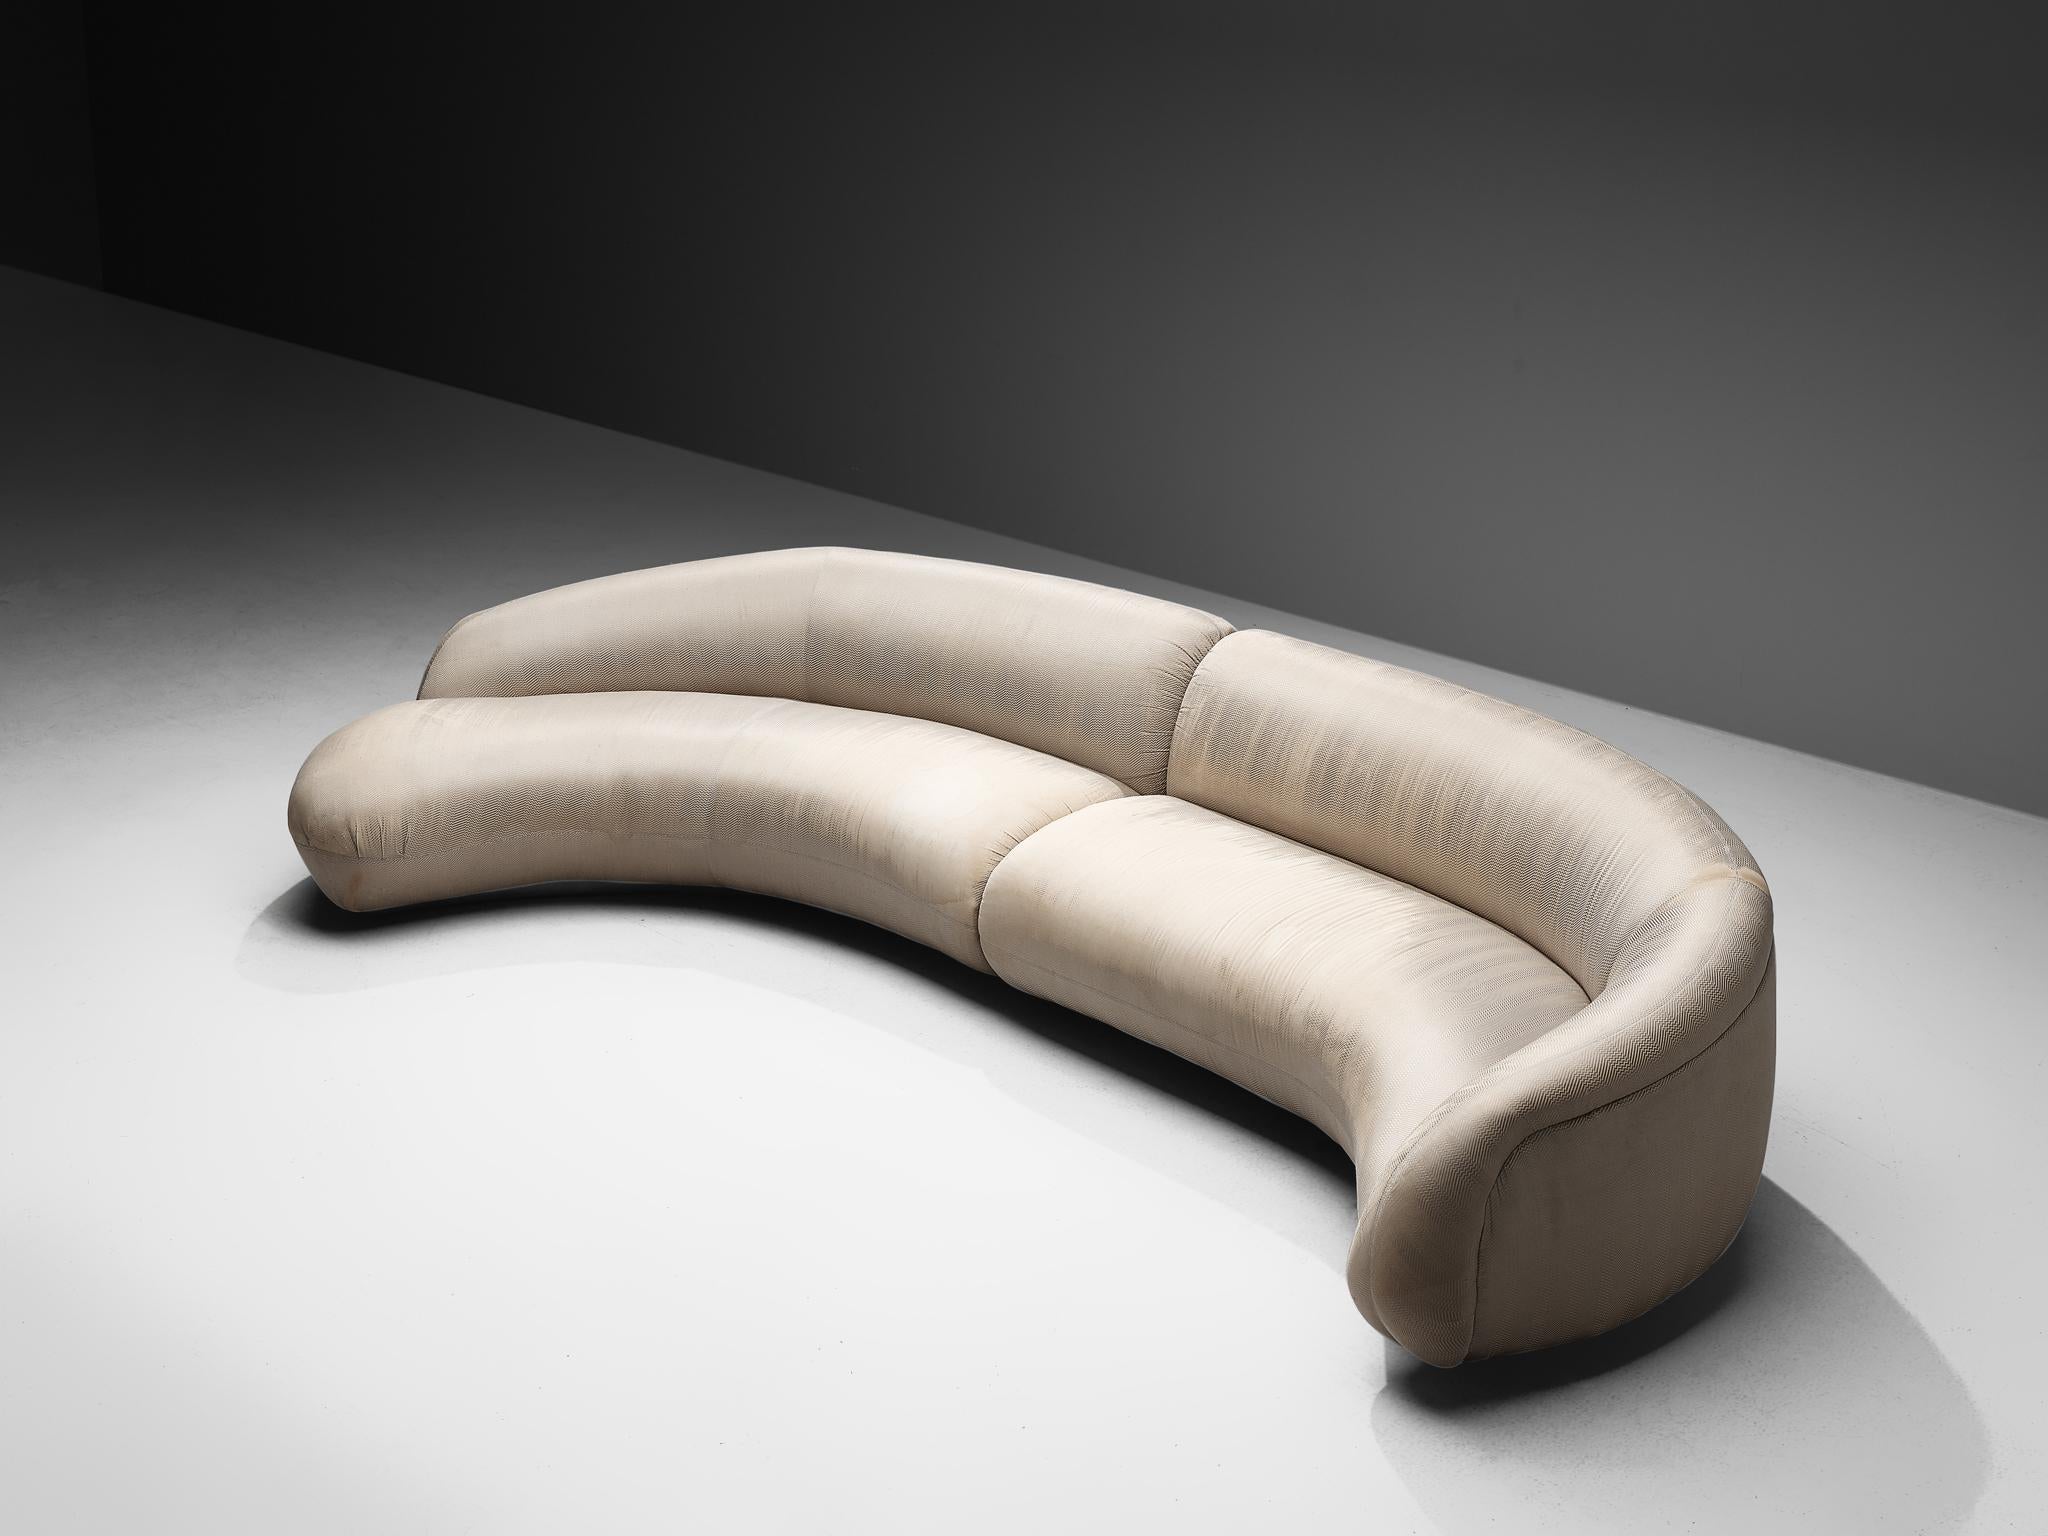 Vladimir Kagan for Weiman Preview, sofa, fabric, United Stated, 1970s

A freeform sofa by Vladimir Kagan, consisting of two asymmetrical parts that can be placed together to form a whole, or placed separately. The sofa has a sculptural beauty